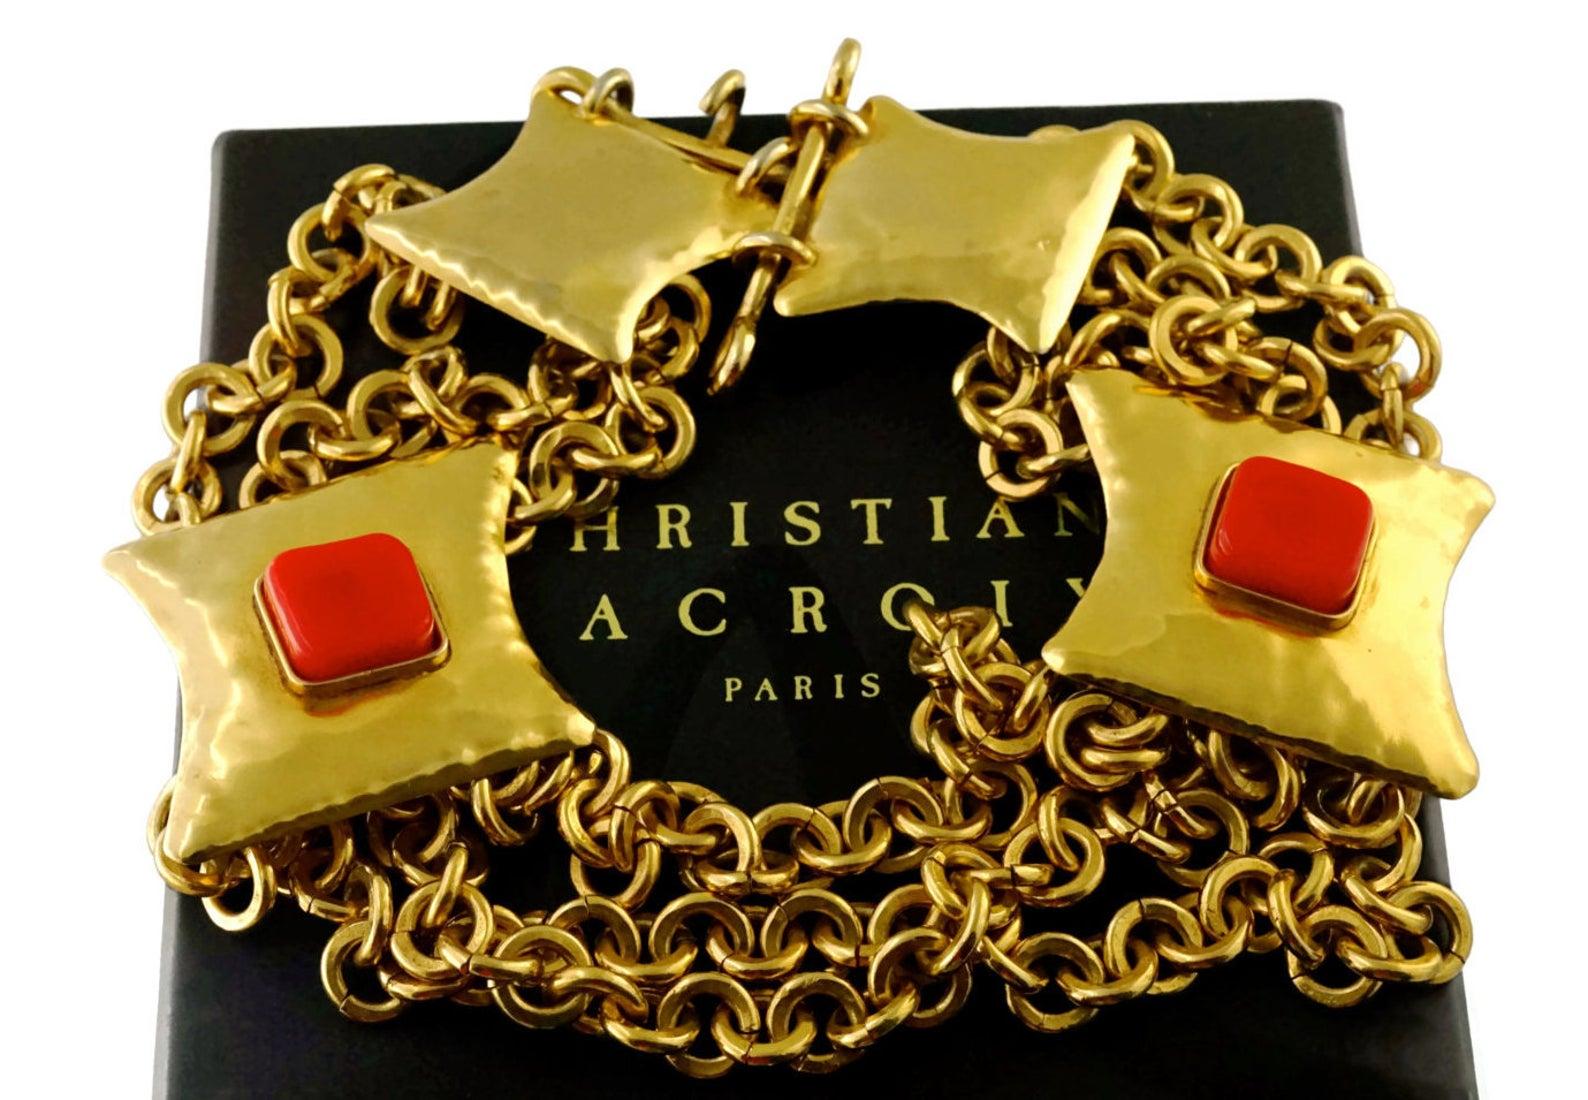 Vintage CHRISTIAN LACROIX Byzantine Cabochon Tiered Chain Plate Necklace

Measurements:
Height: 2 inches (square plates with cabochons)
Wearable Length: 19 inches

Features:
- 100% Authentic CHRISTIAN LACROIX.
- 3 layered chains.
- Square metal